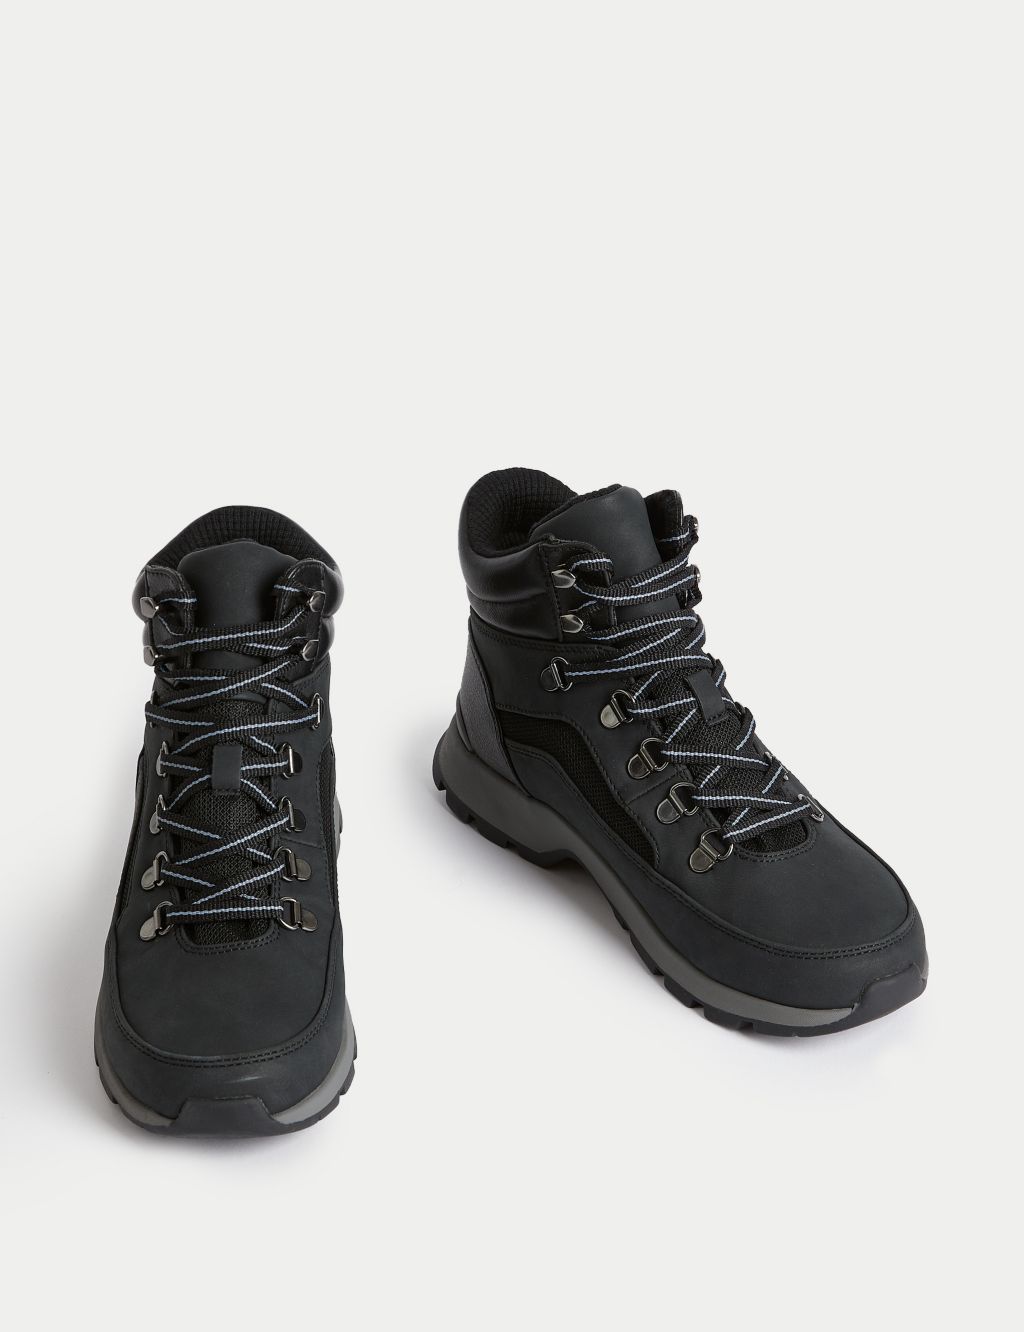 Waterproof Lace Up Walking Boots image 2